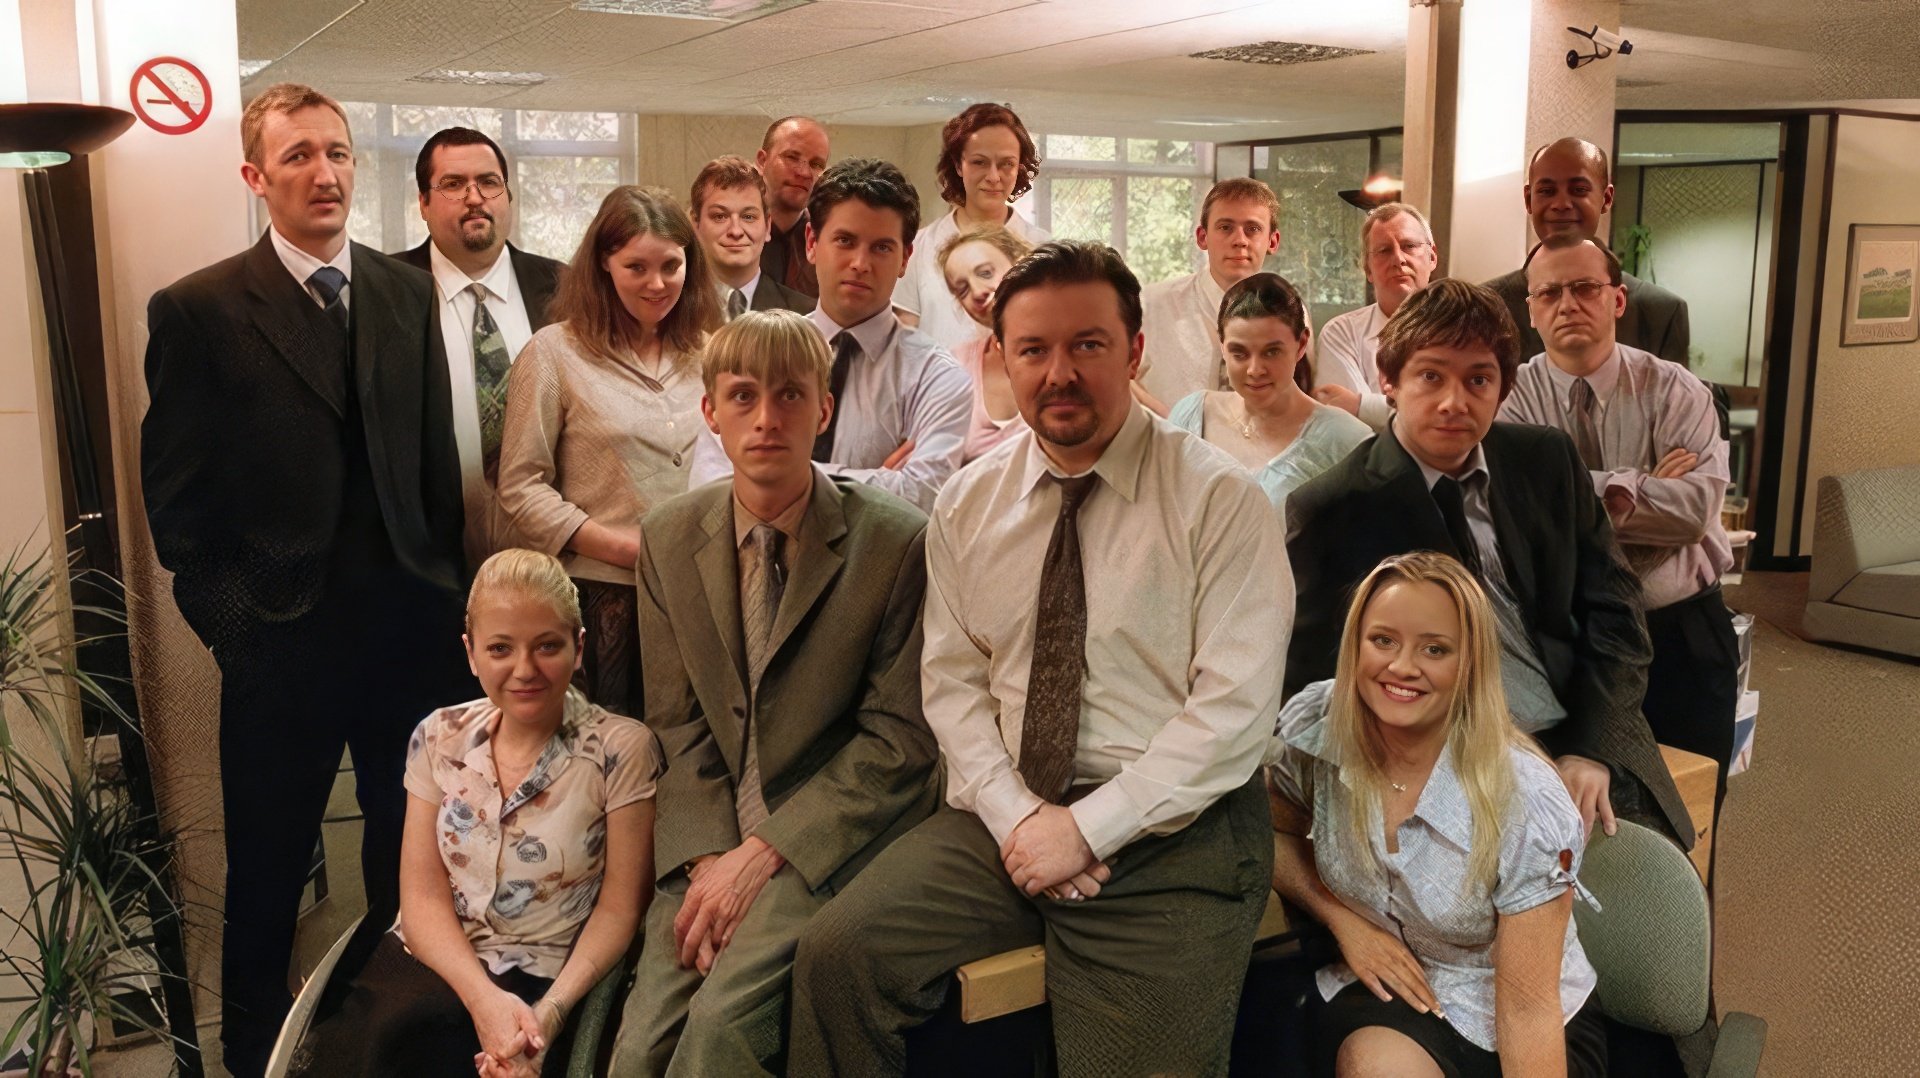 On the set of The Office